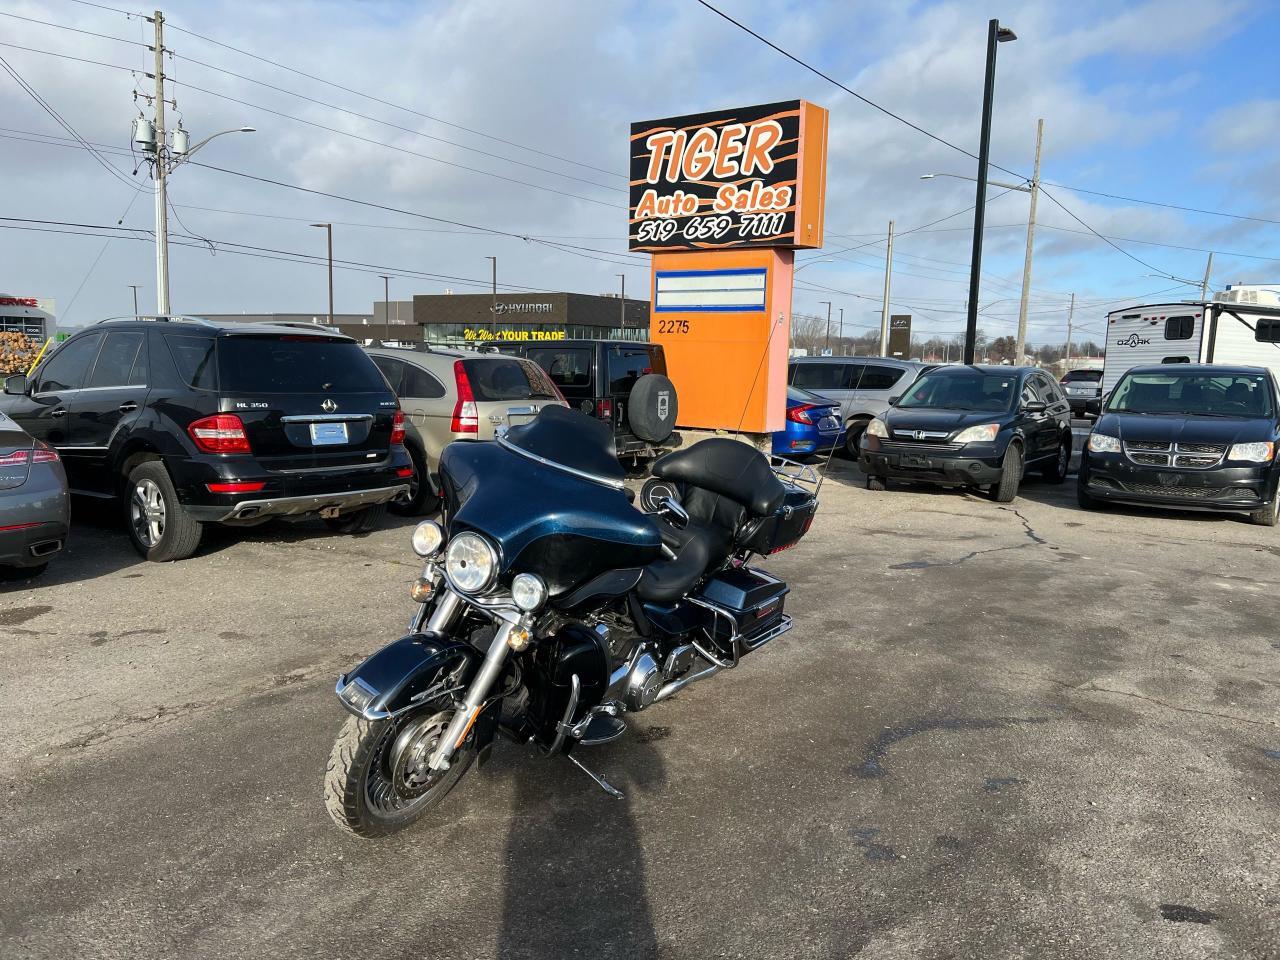 2013 Harley-Davidson FLHTK Electra Glide Ultra Limited LIMITED**ELECTRA**VANCE N HINES**RUNS GREAT**AS IS